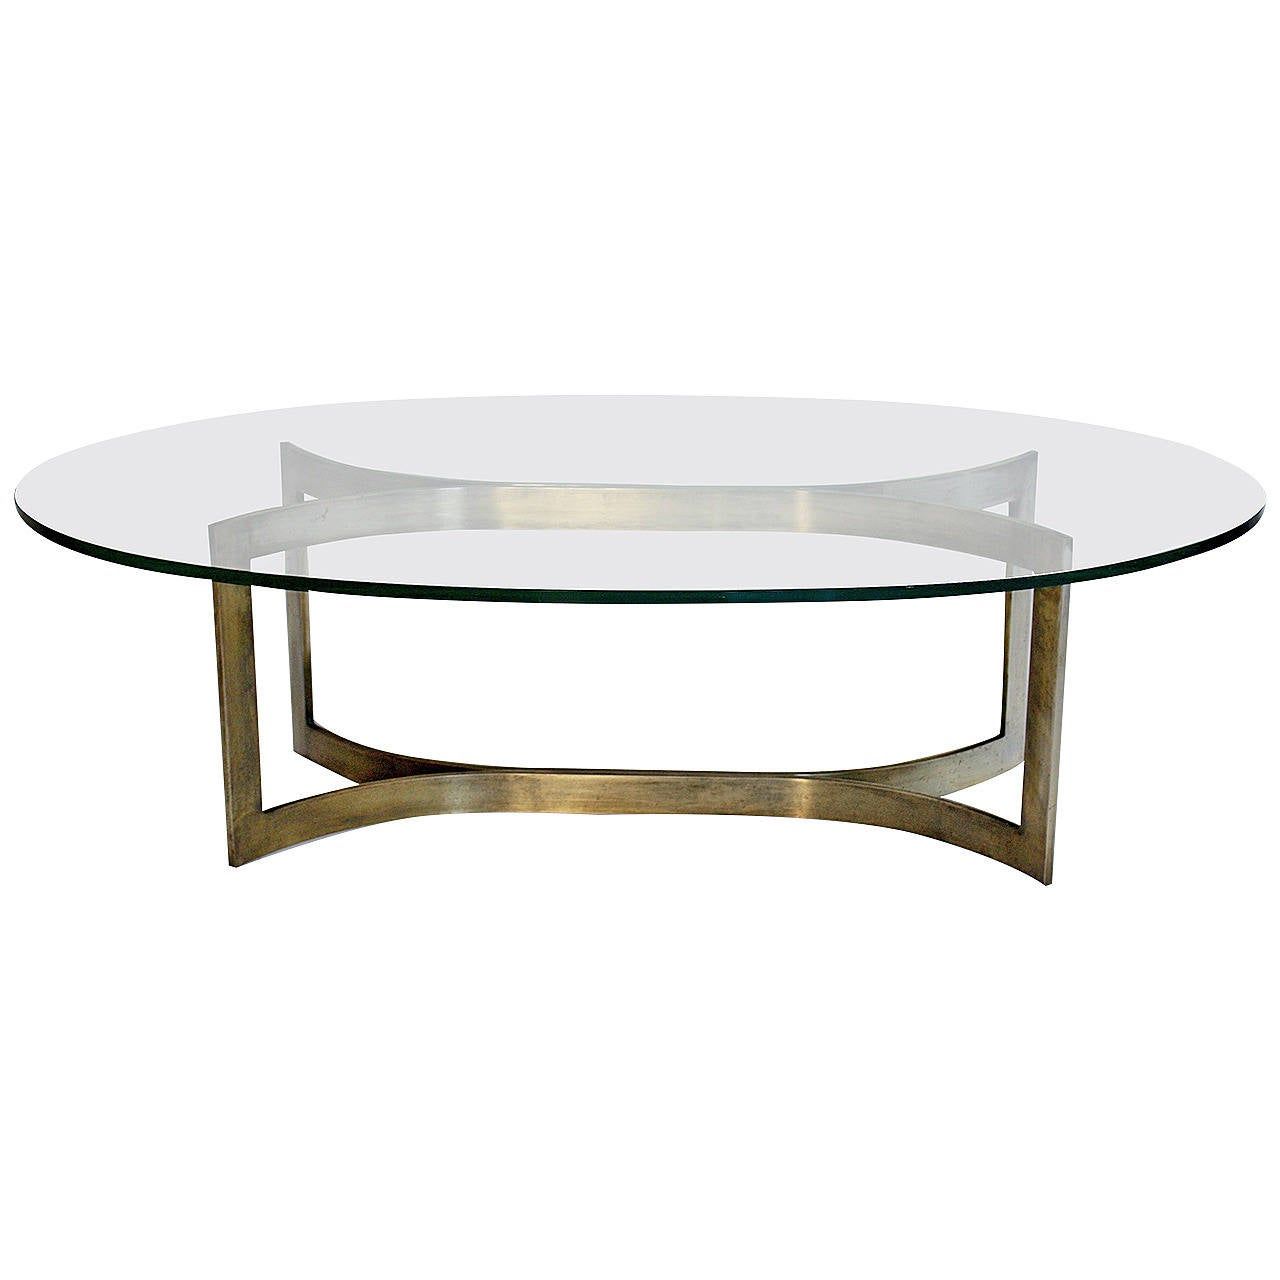 Baker Bronze And Glass Oval Cocktail Table At 1stdibs With Glass And Gold Oval Coffee Tables (View 13 of 15)